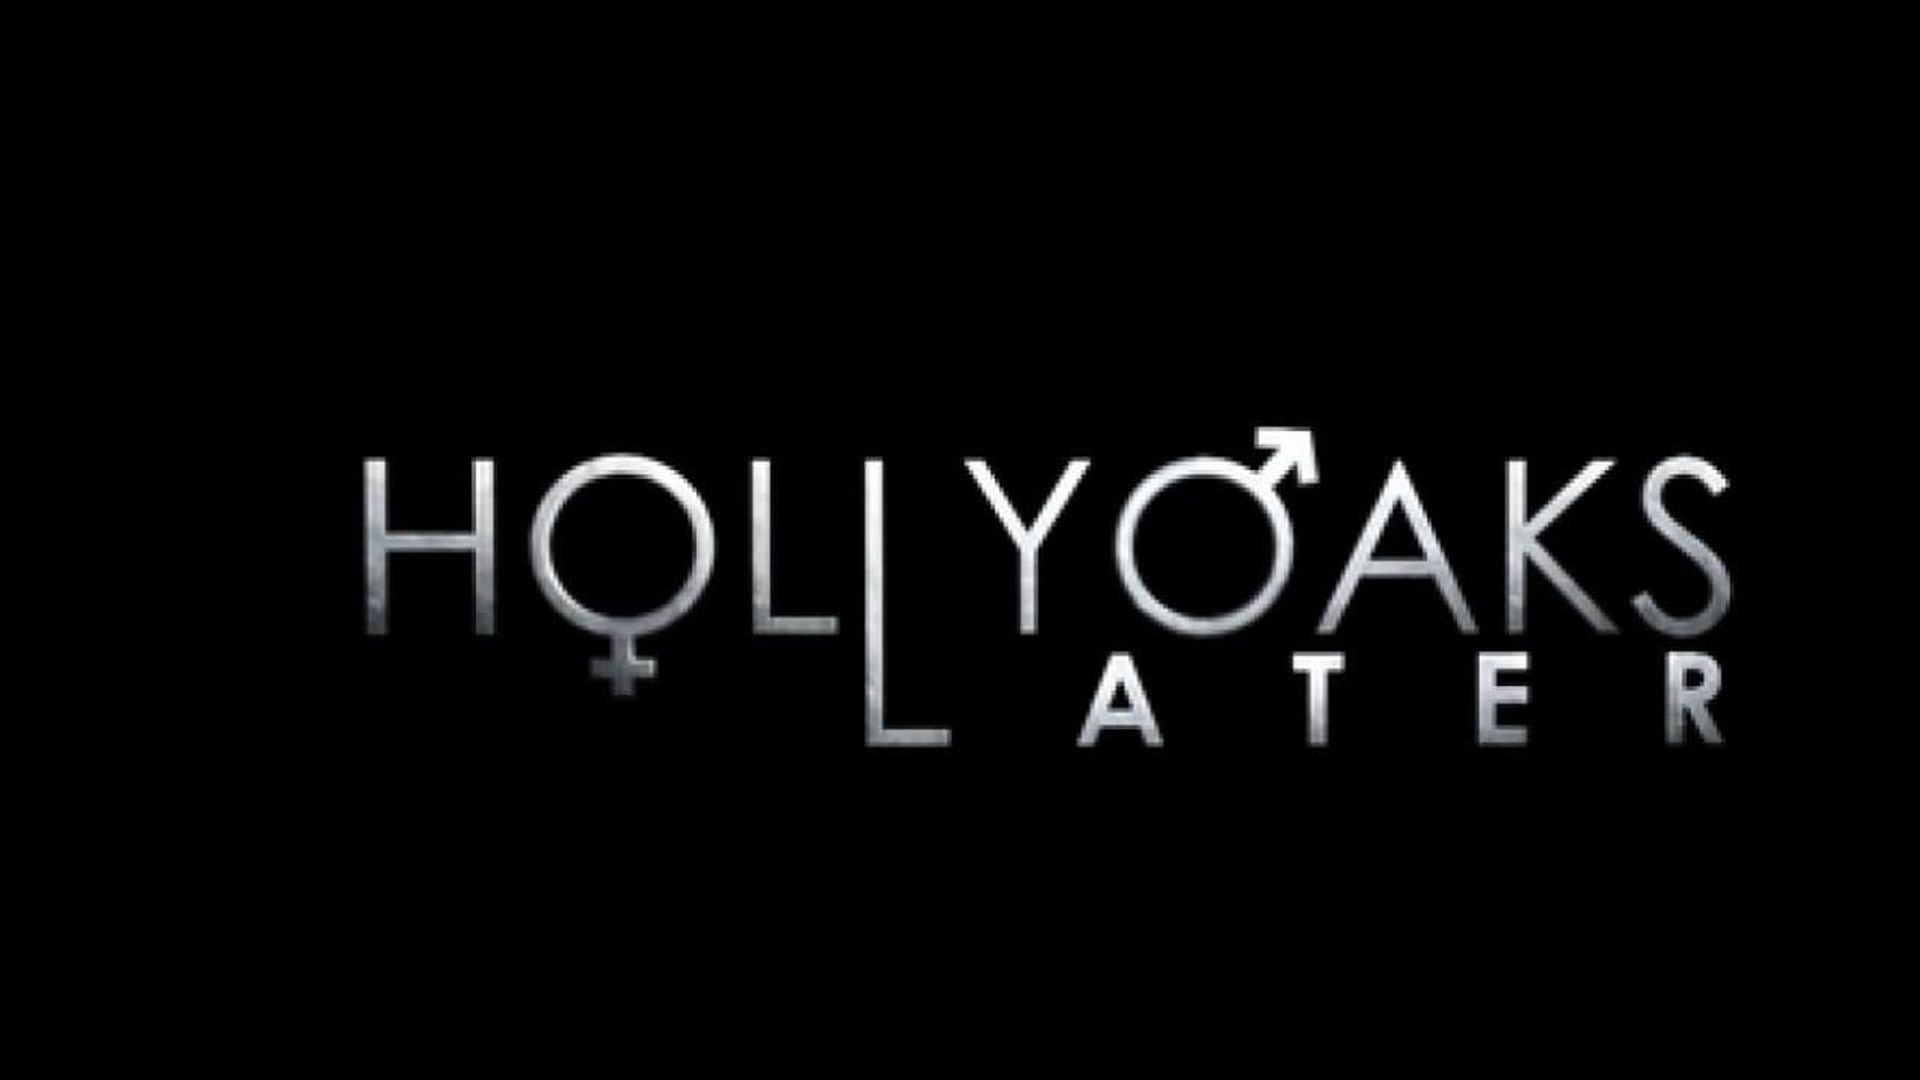 Hollyoaks Later background